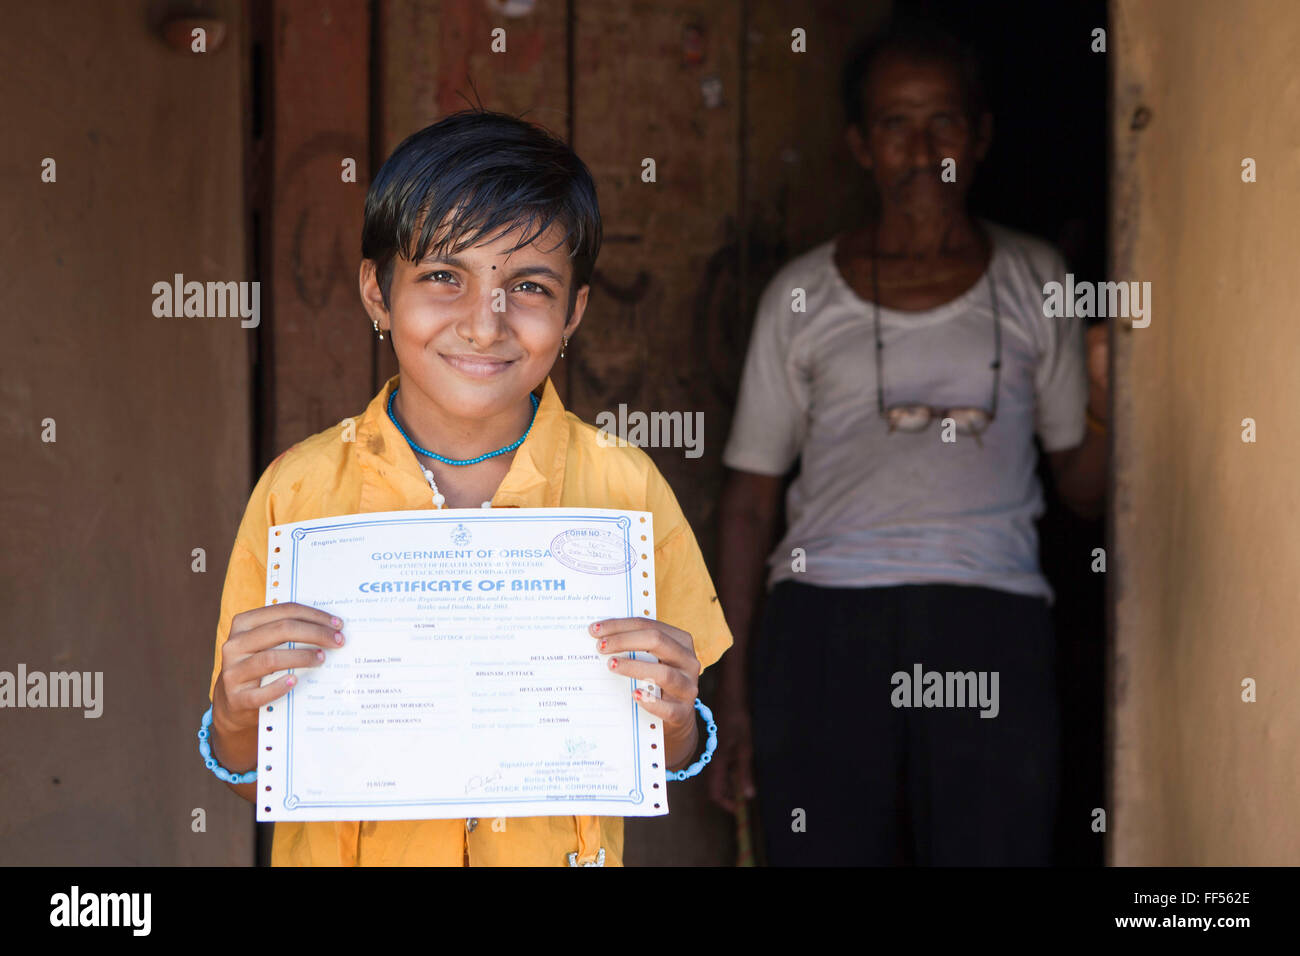 A young girl from the Dobhanda Nagar slum in Cuttack gets her birth certificates from the Urban Law centre run by the organisation CLAP. Committee for Legal Aid to Poor (CLAP) helps provide legal aid to the poorer communities in the Orissa district of India. Stock Photo